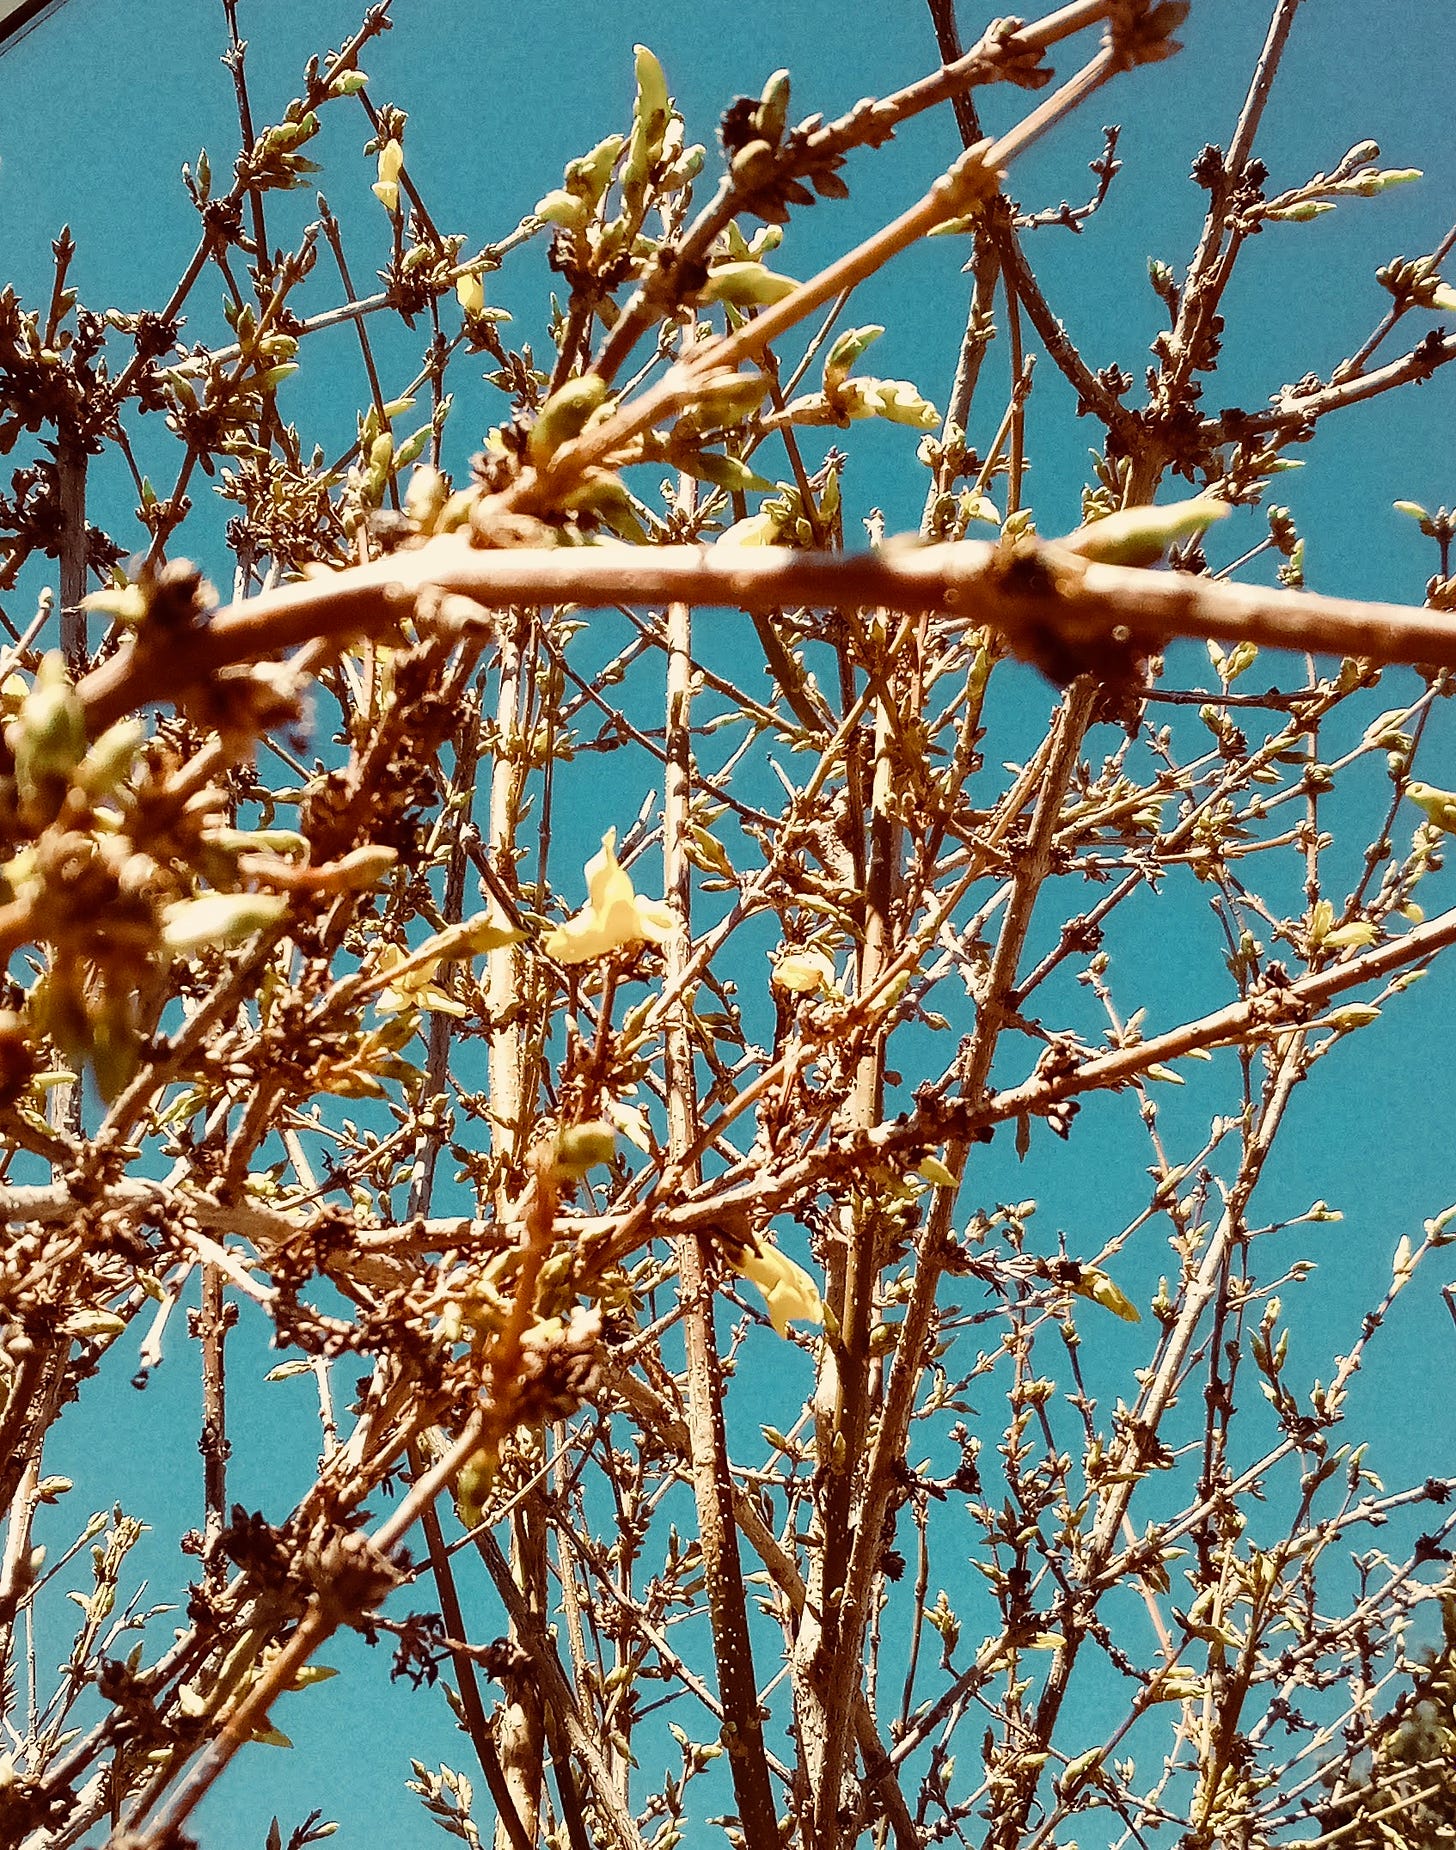 Branches of forsythia budding against a bright blue sky